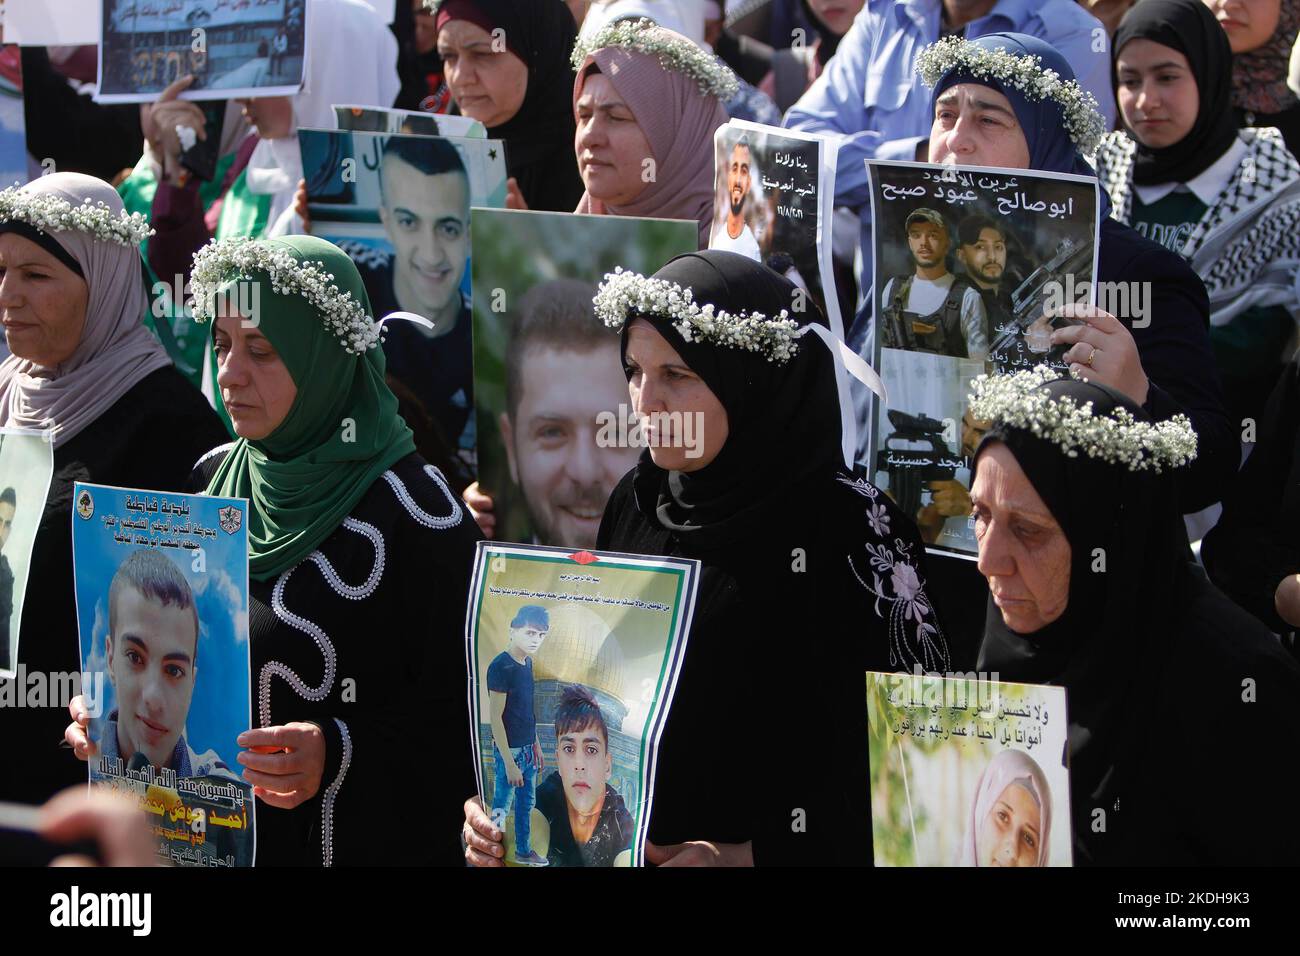 Palestinian women hold pictures of Palestinians who were shot dead by the Israeli army during a protest in Nablus. Palestinians stage a protest against the killing of Palestinian youths during a raid on West Bank. Israeli army has killed nearly 180 Palestinians in the West Bank and Gaza since the beginning of this year. Stock Photo